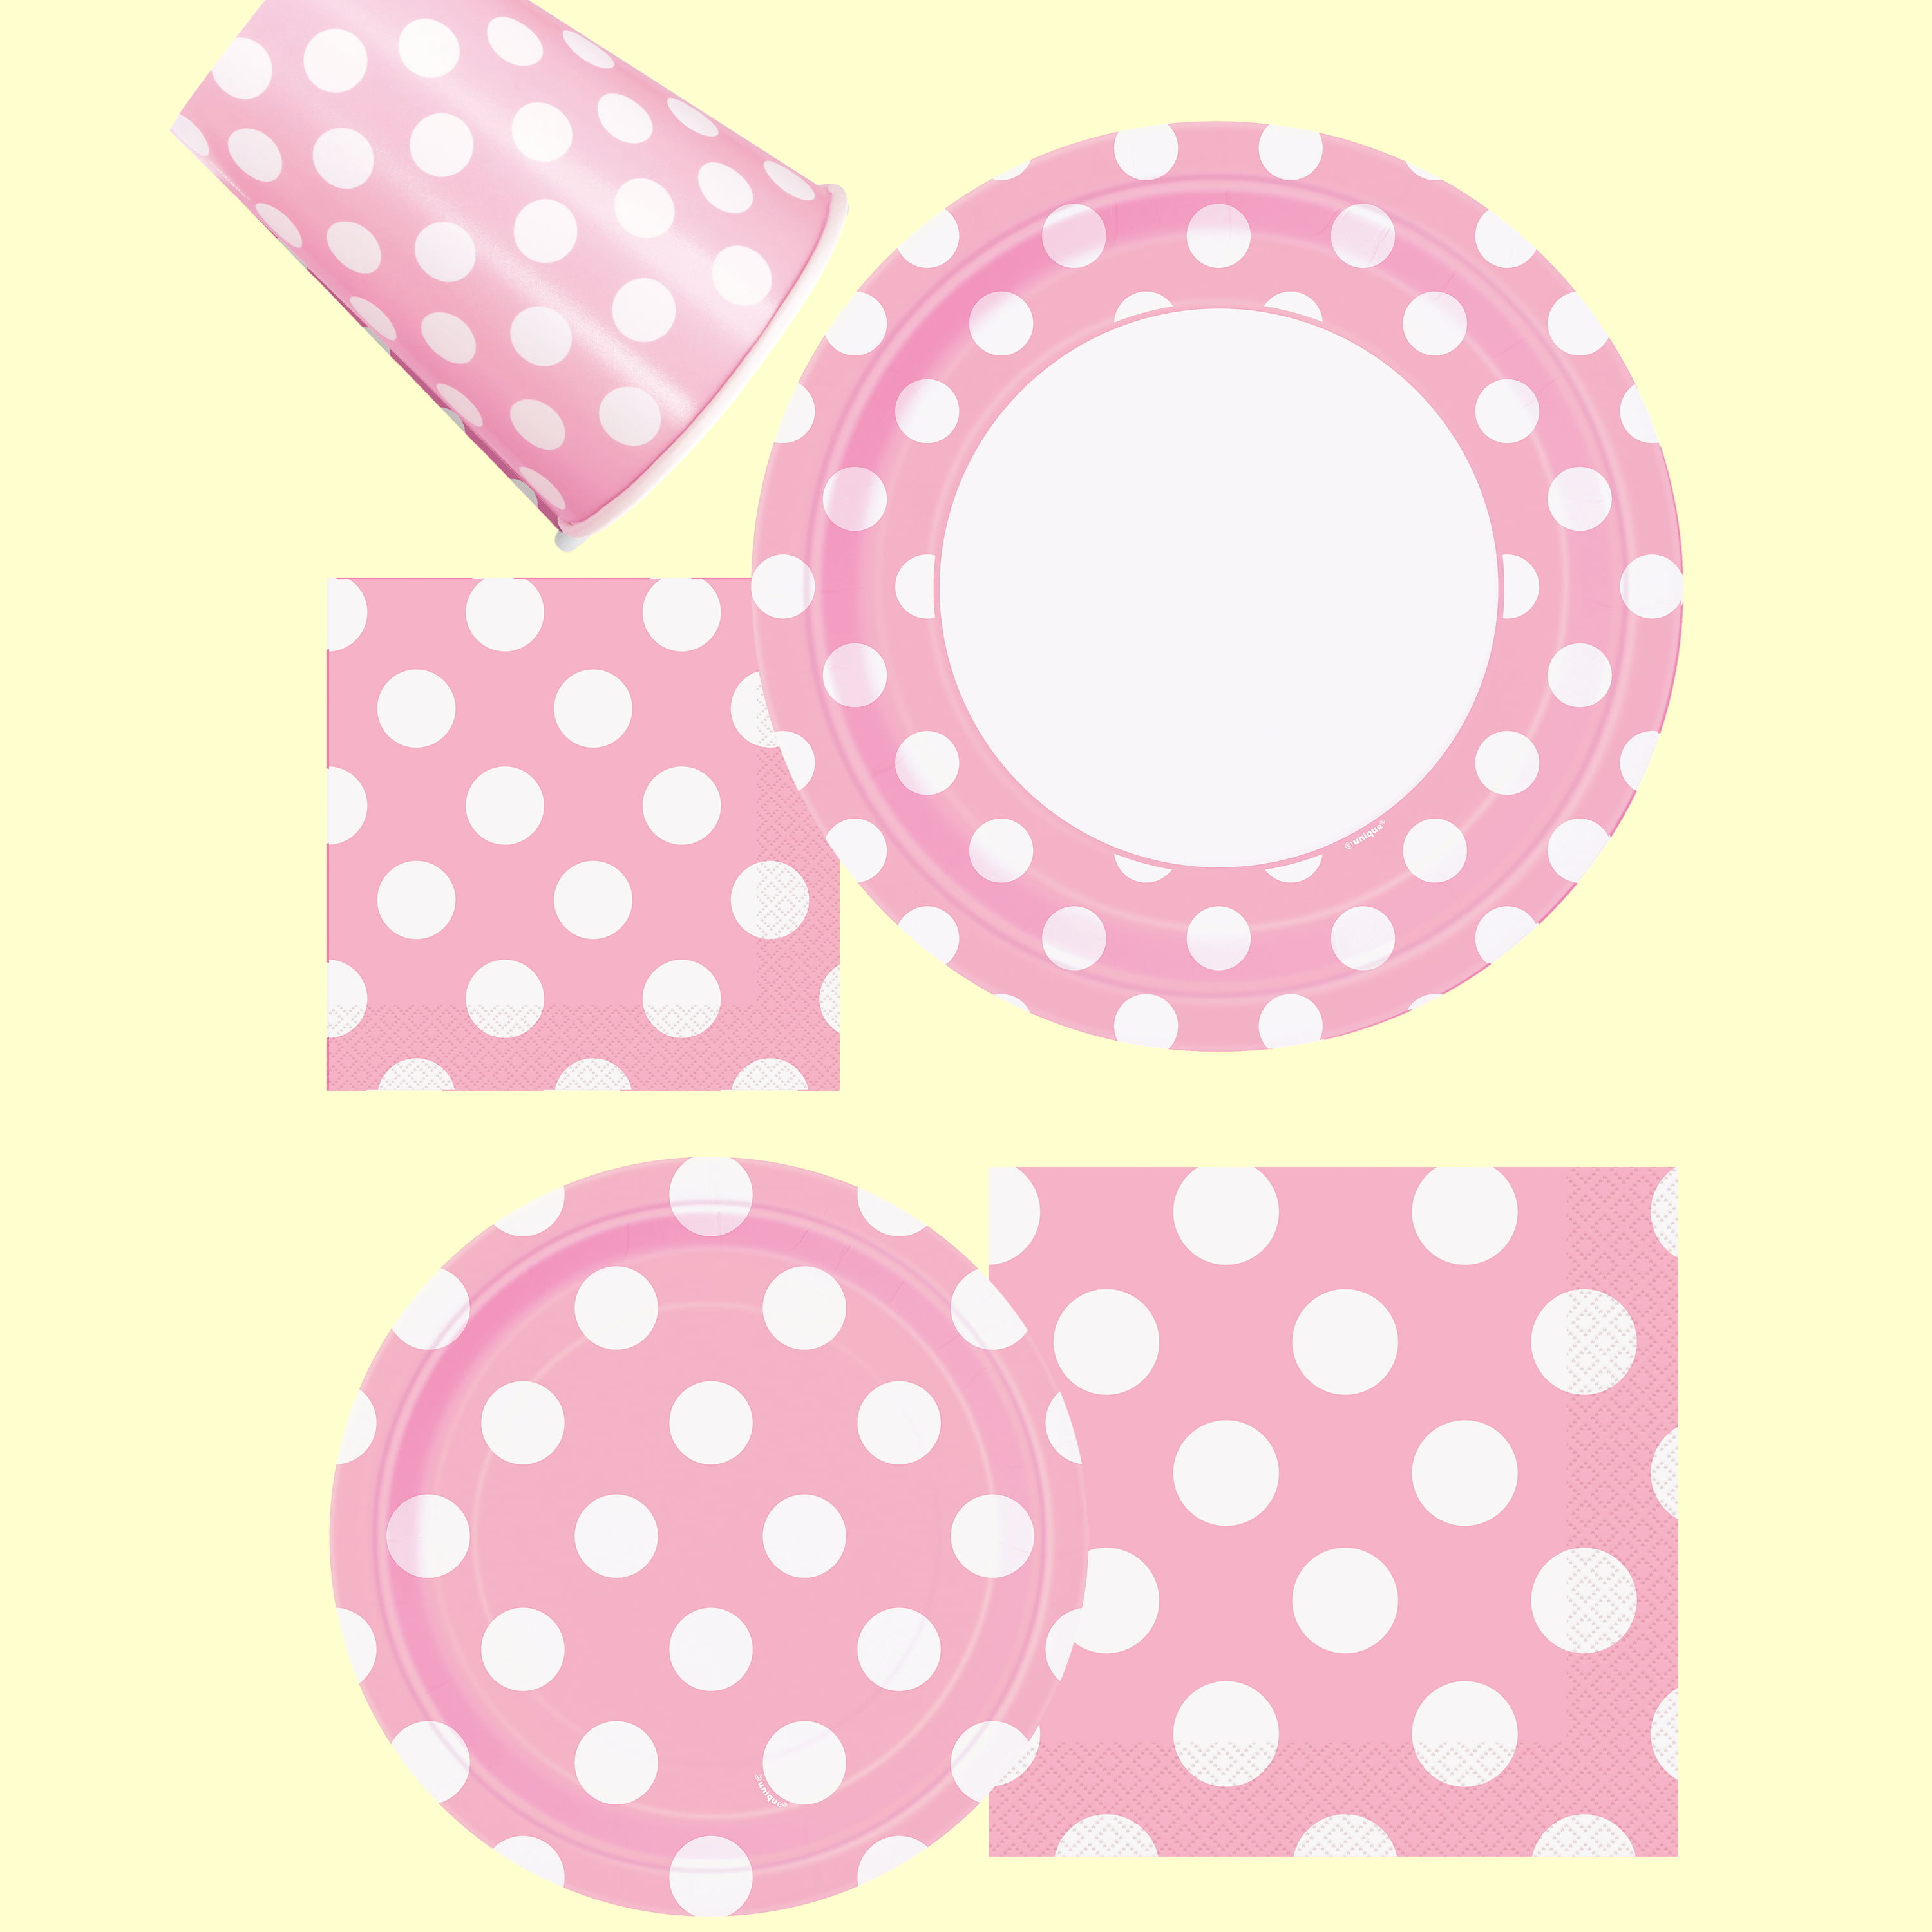 LOVELY PINK POLKA DOTS SMALL PAPER PLATES 8 ~ Birthday Party Supplies Dessert 